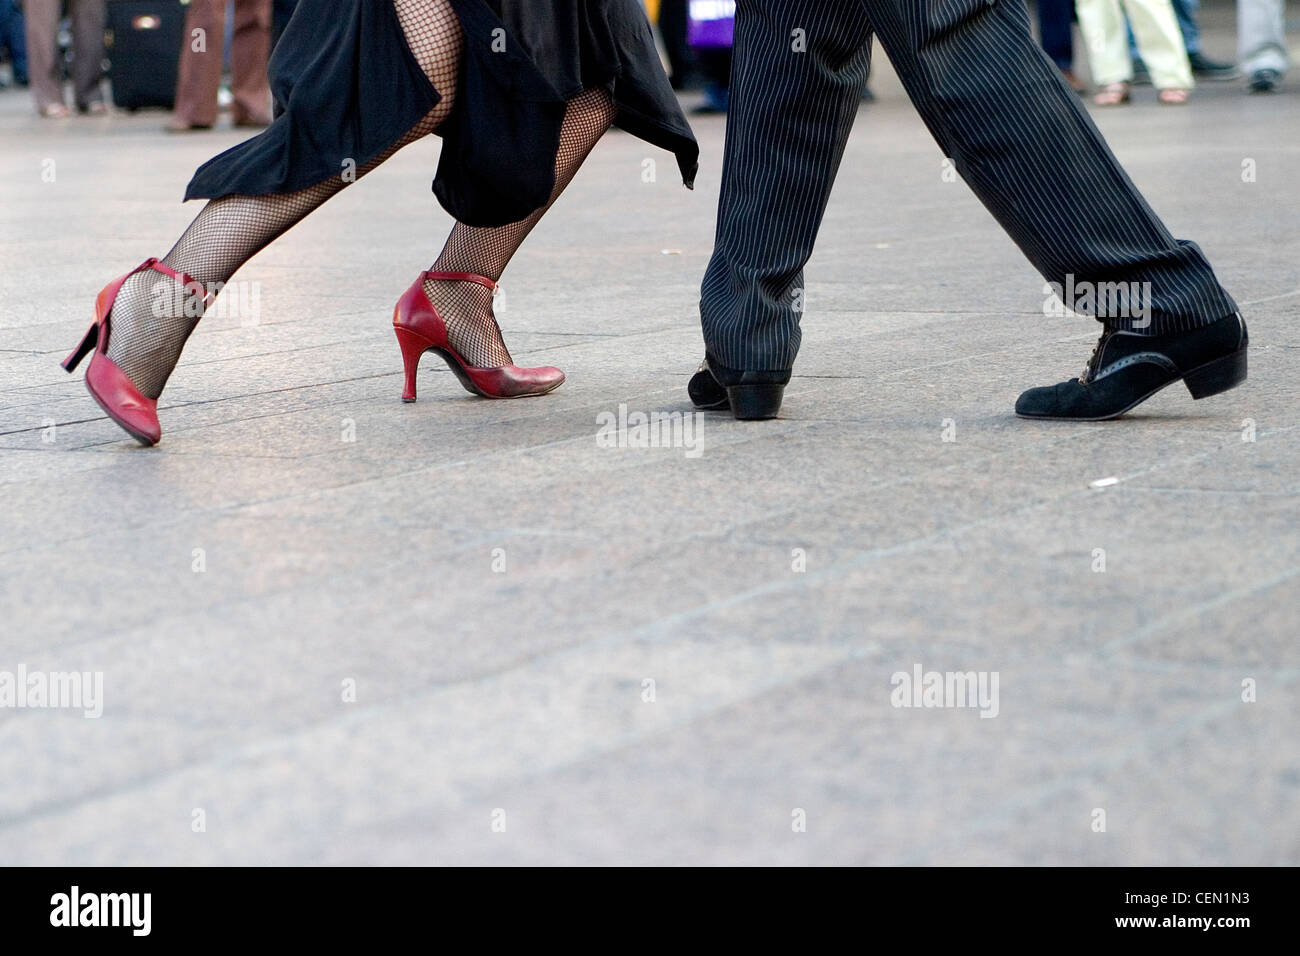 Dancers tango in the streets of Paris, France Stock Photo